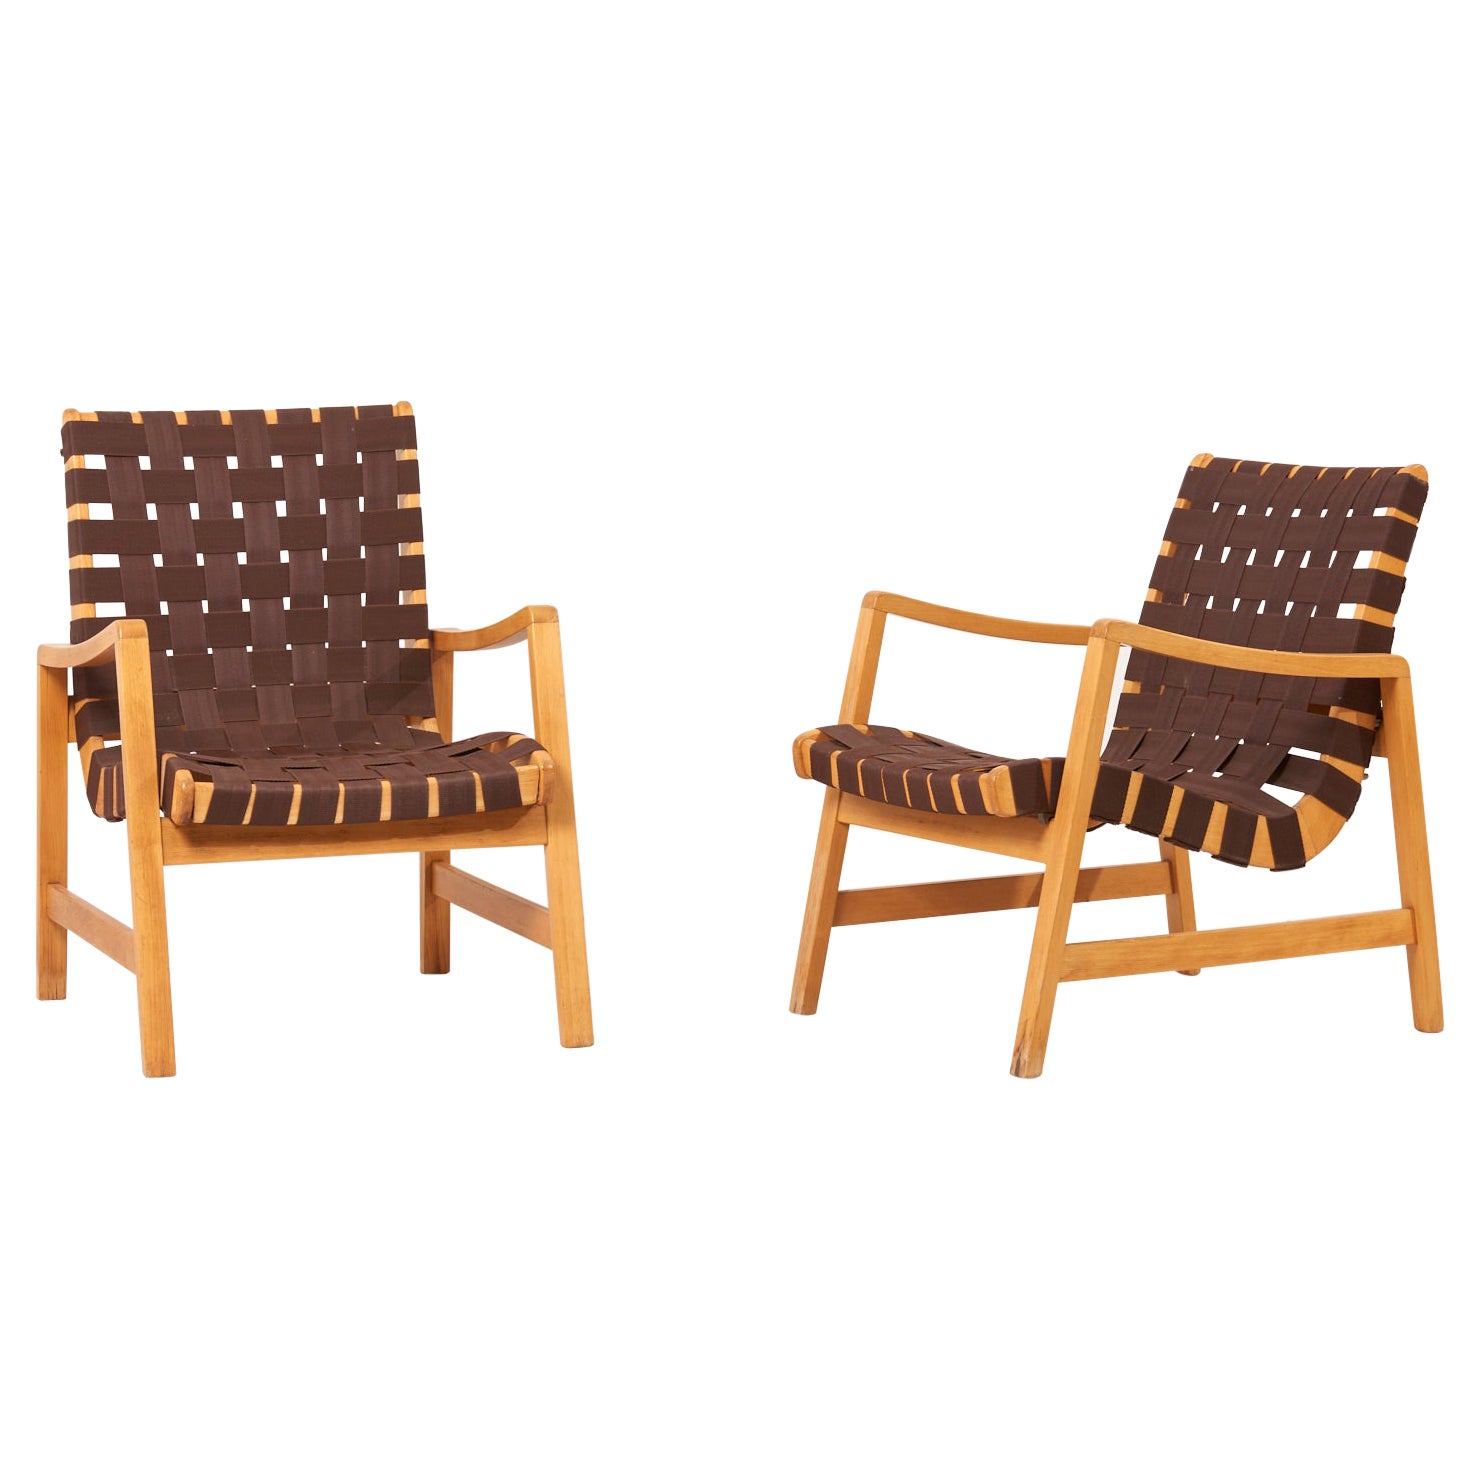 Pair of Jens Risom Lounge Chairs in Brown Webbing for Knoll, 1950s For Sale